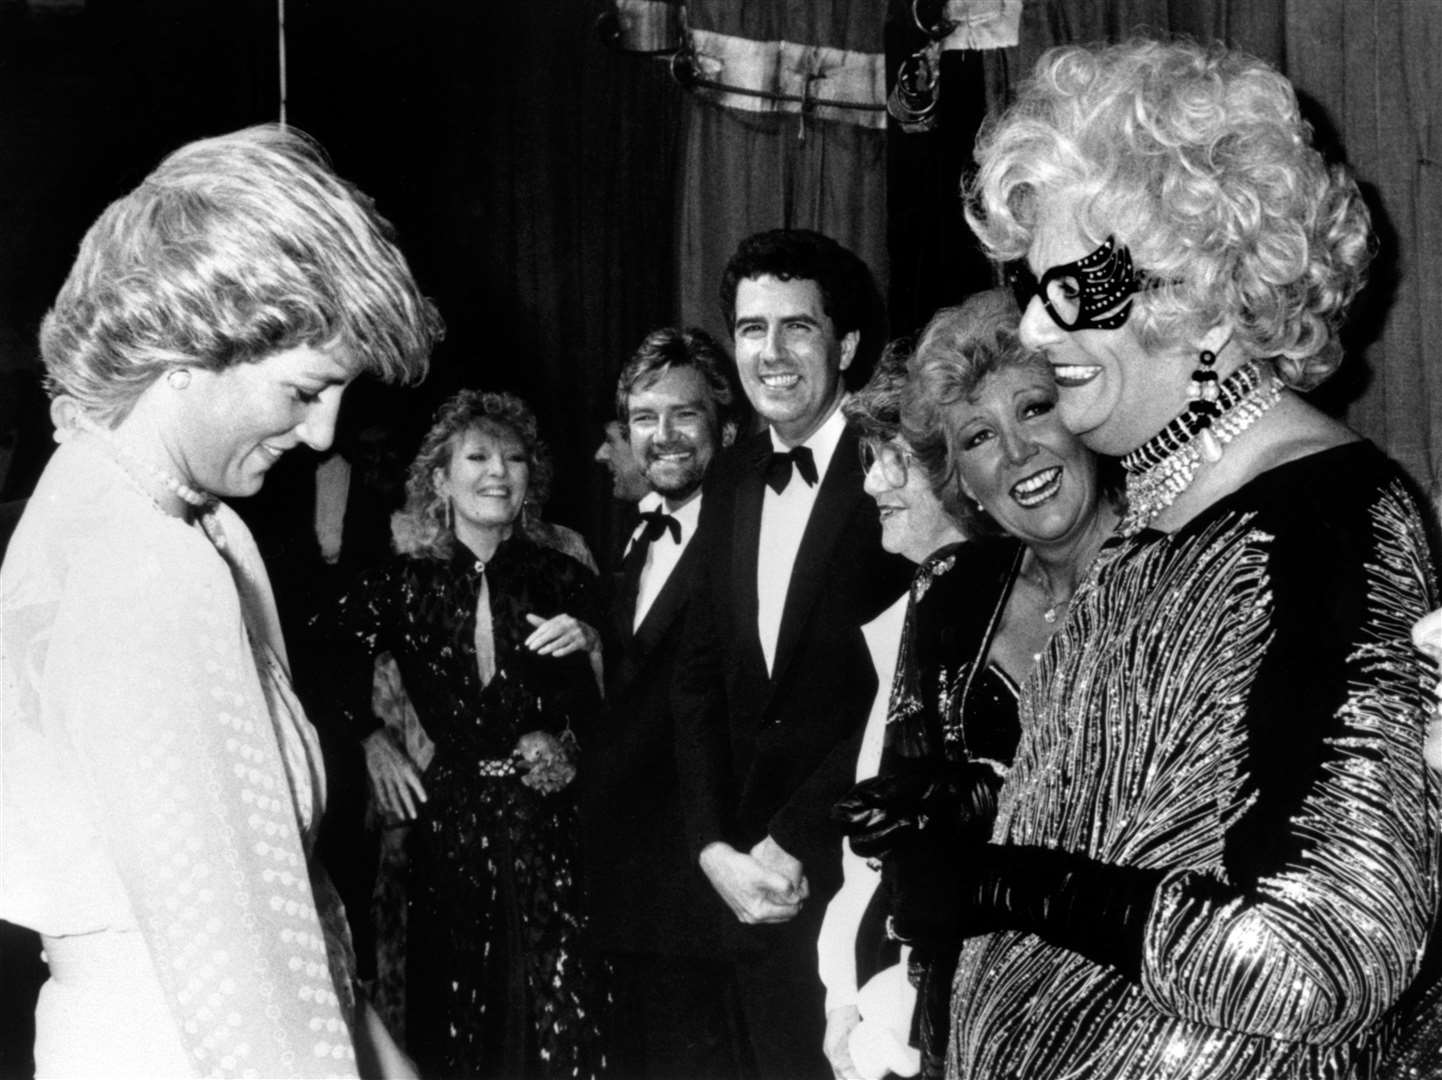 The Princess of Wales enjoying a chat with Dame Edna Everage (alias Barry Humphries) backstage at the Golden Jubilee concert at the London Palladium in 1987 (PA)